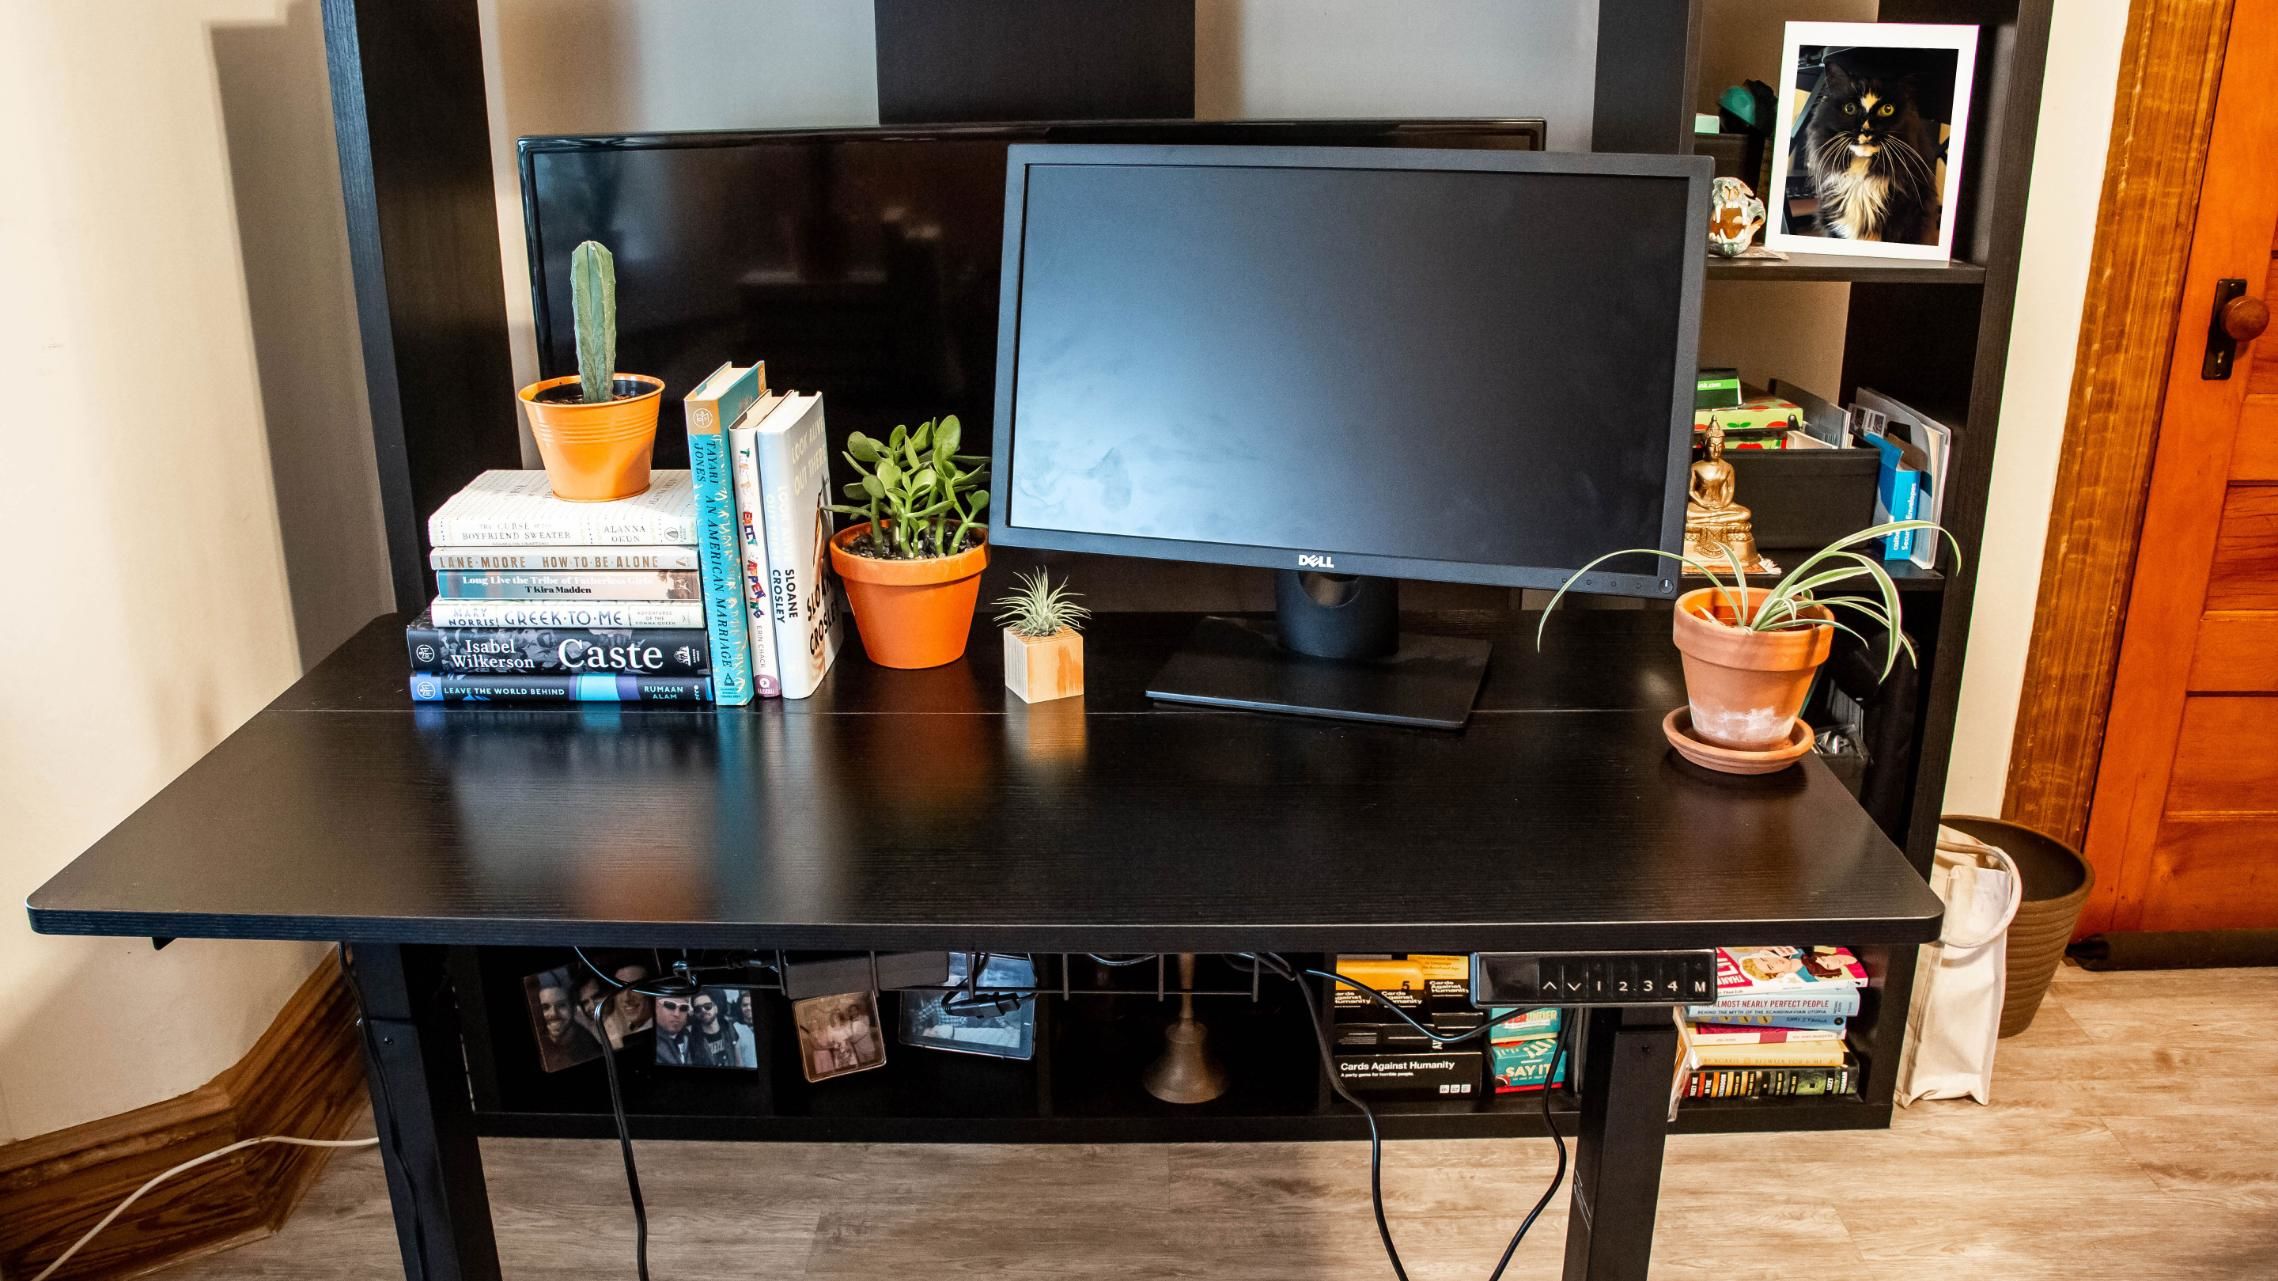 SHW Electric Height-Adjustable Computer Desk review